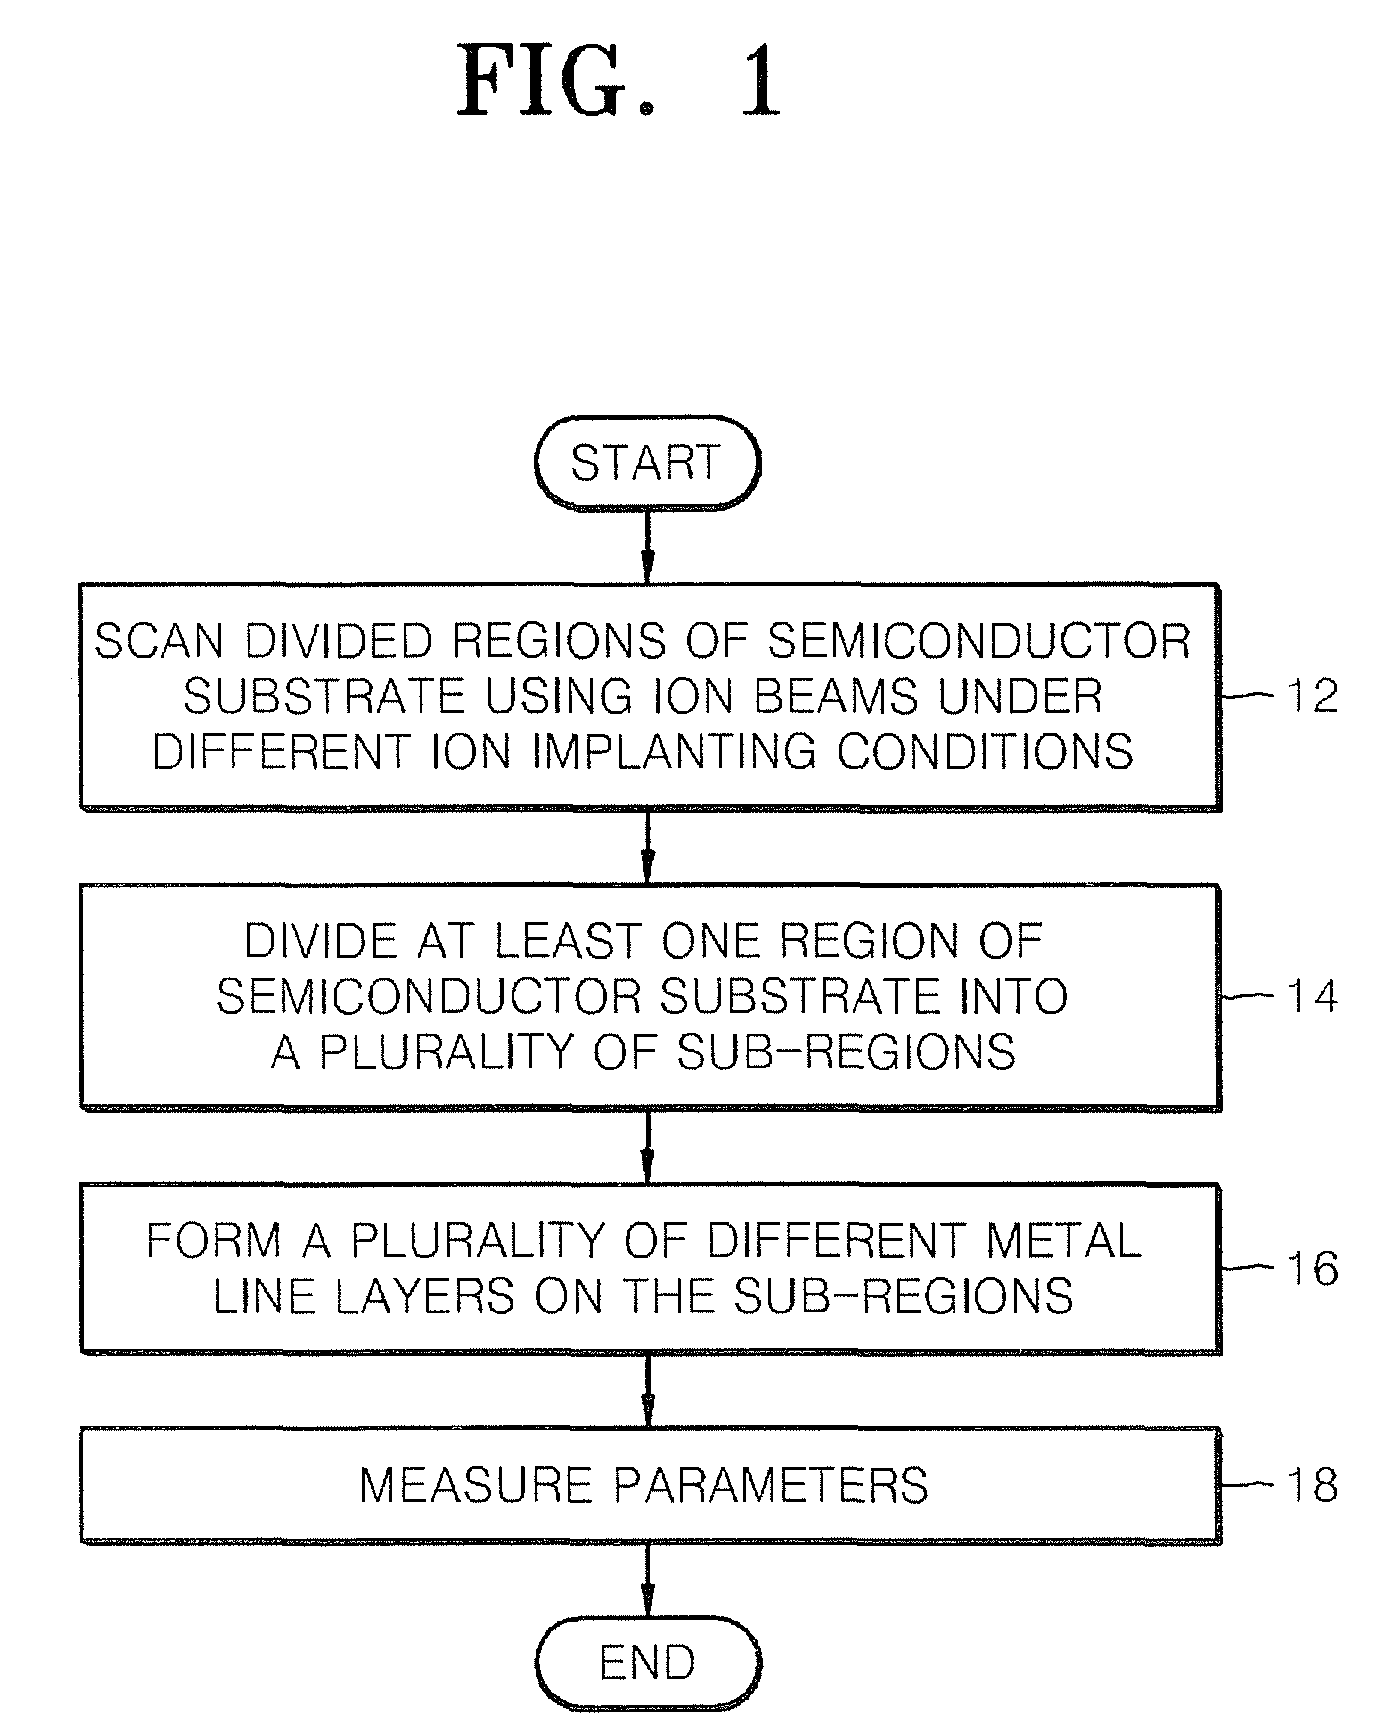 Semiconductor process evaluation methods including variable ion implanting conditions